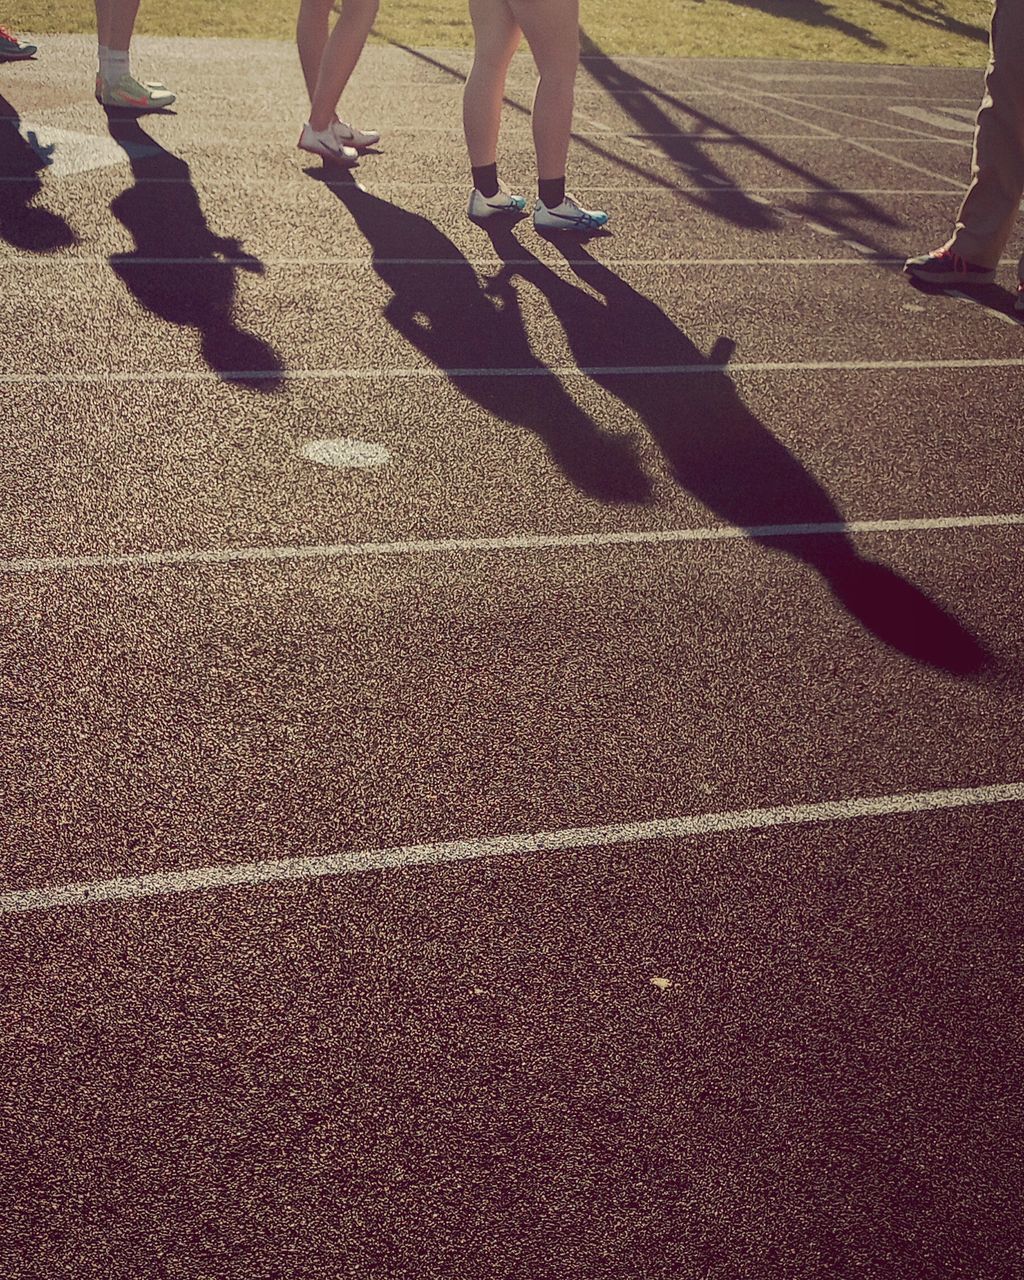 low section, human leg, shadow, flooring, group of people, sunlight, lifestyles, men, day, asphalt, human limb, sports, road surface, limb, shoe, women, adult, leisure activity, nature, floor, walking, outdoors, togetherness, footwear, road, person, high angle view, lane, competition, standing, black, running track